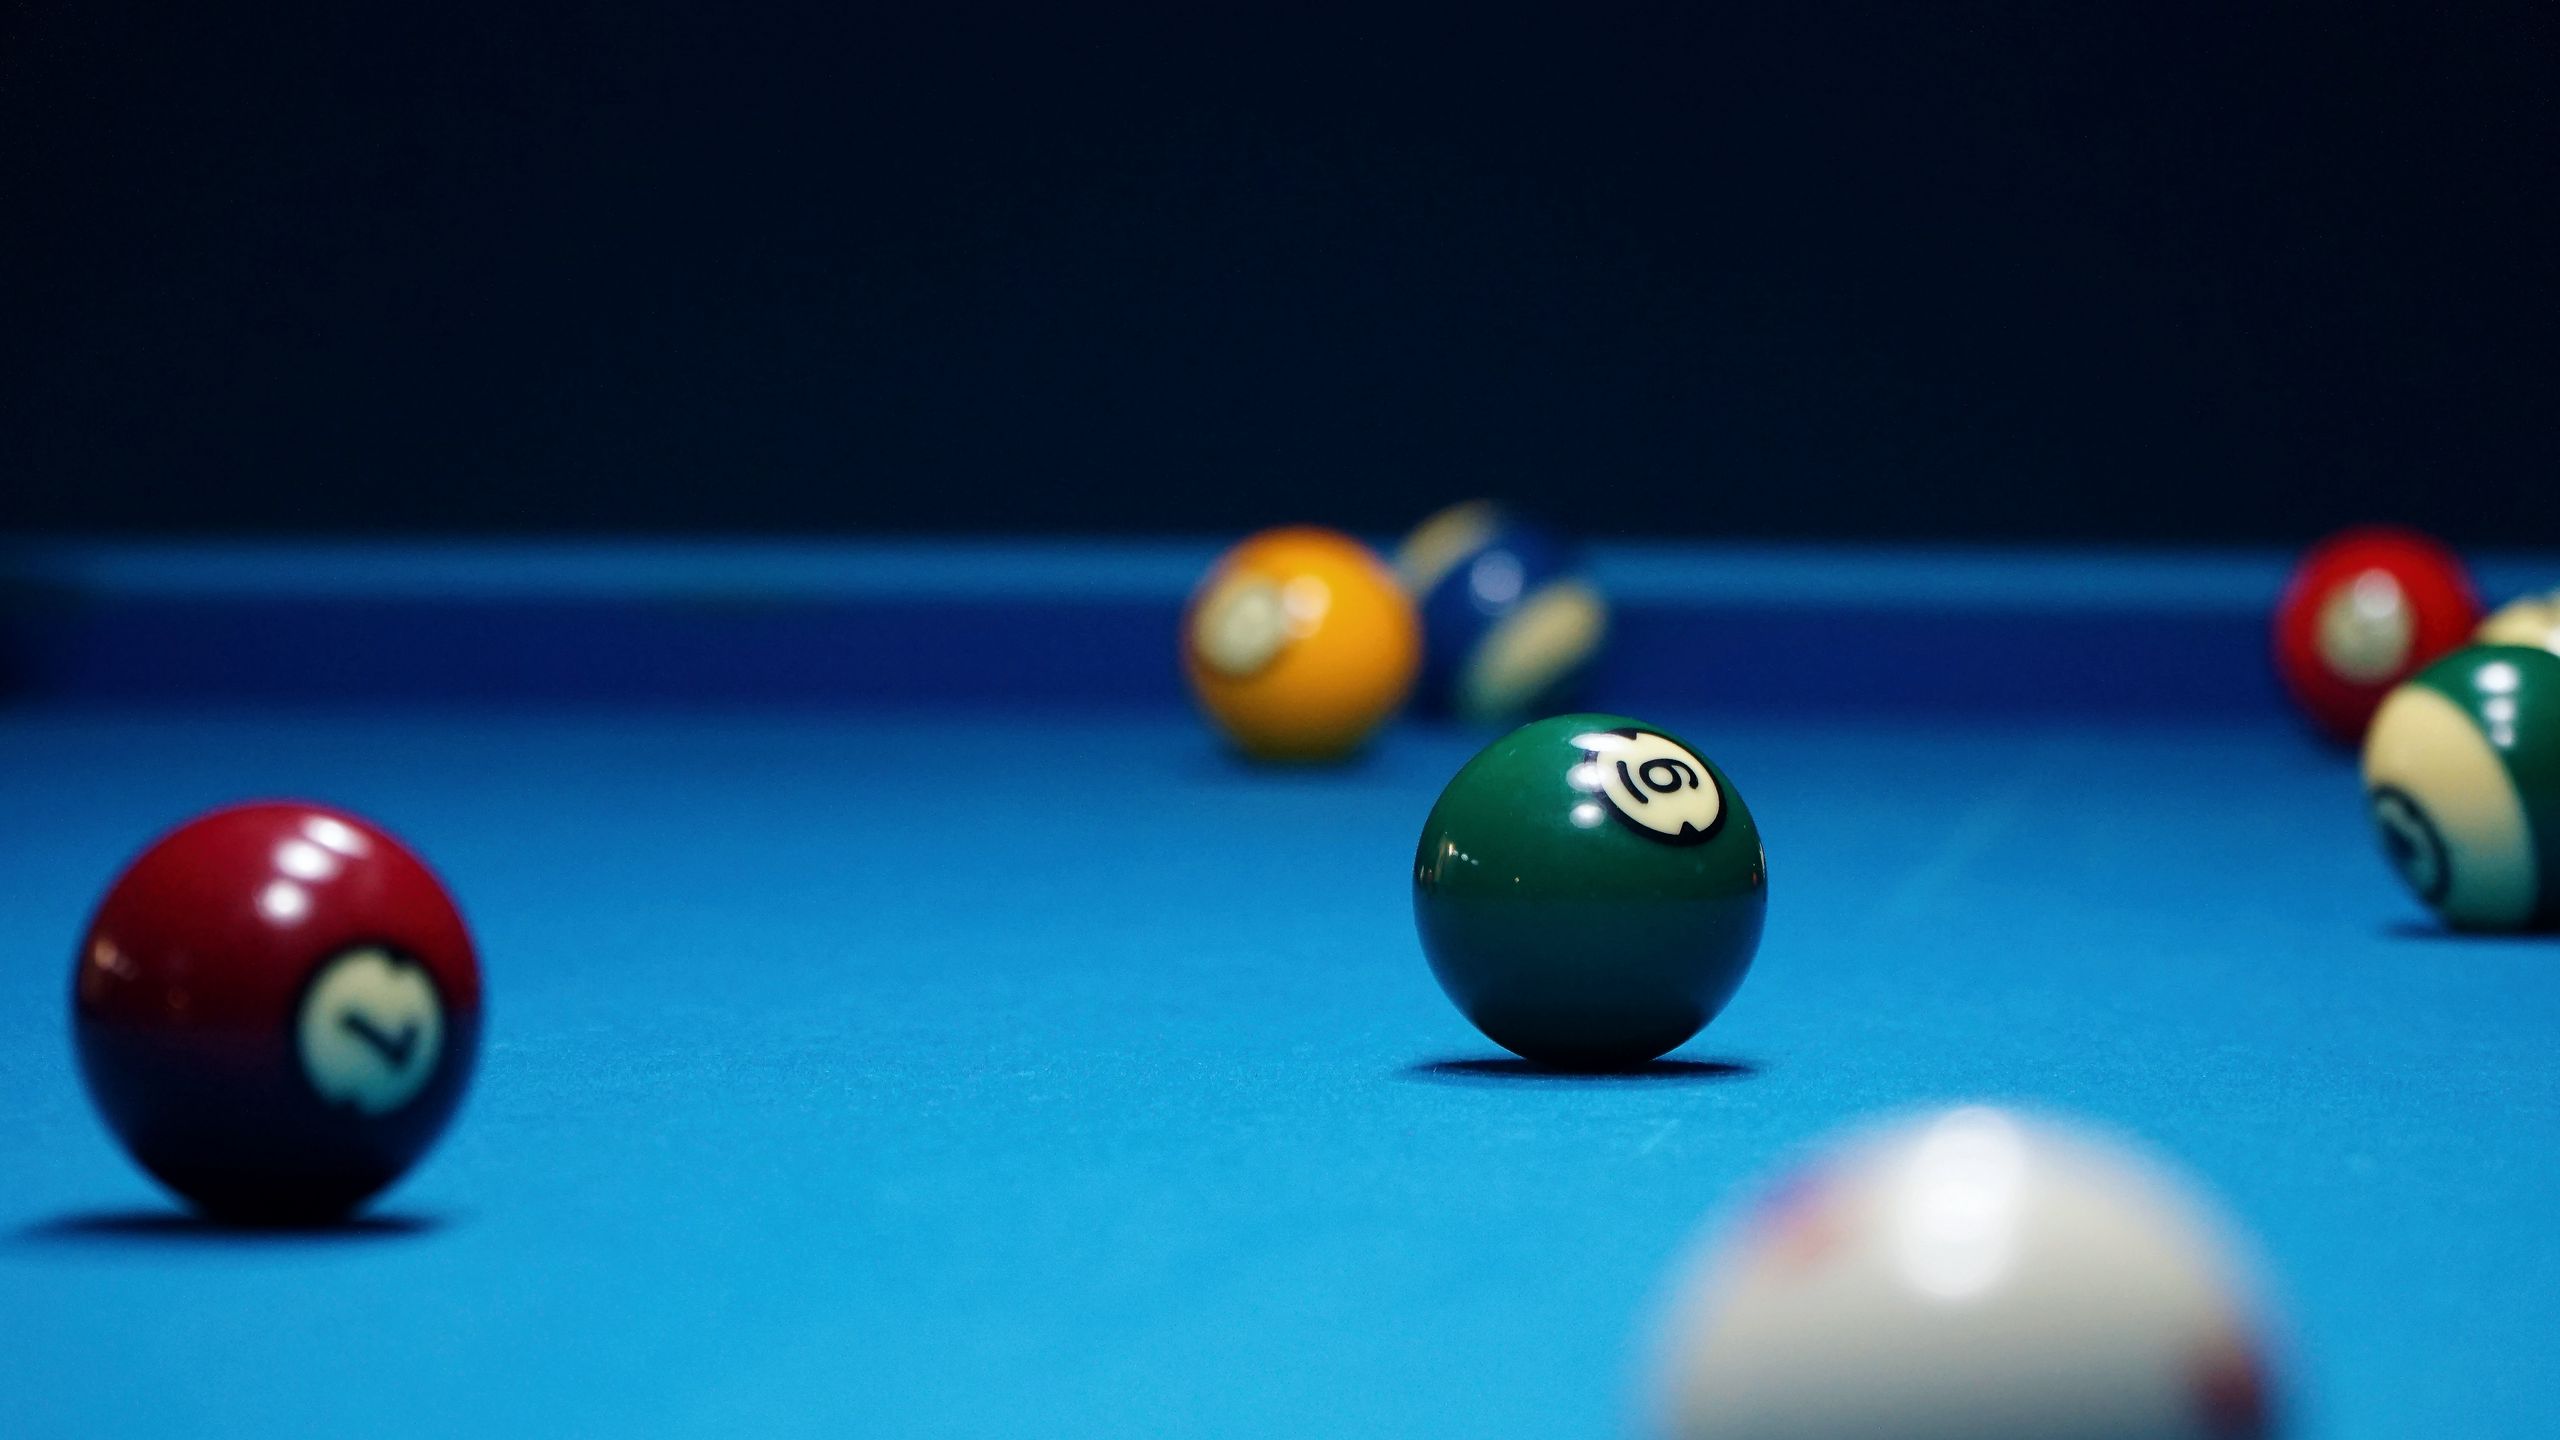 Download wallpaper 2560x1440 billiards, bowls, table, broadcloth widescreen 16:9 HD background